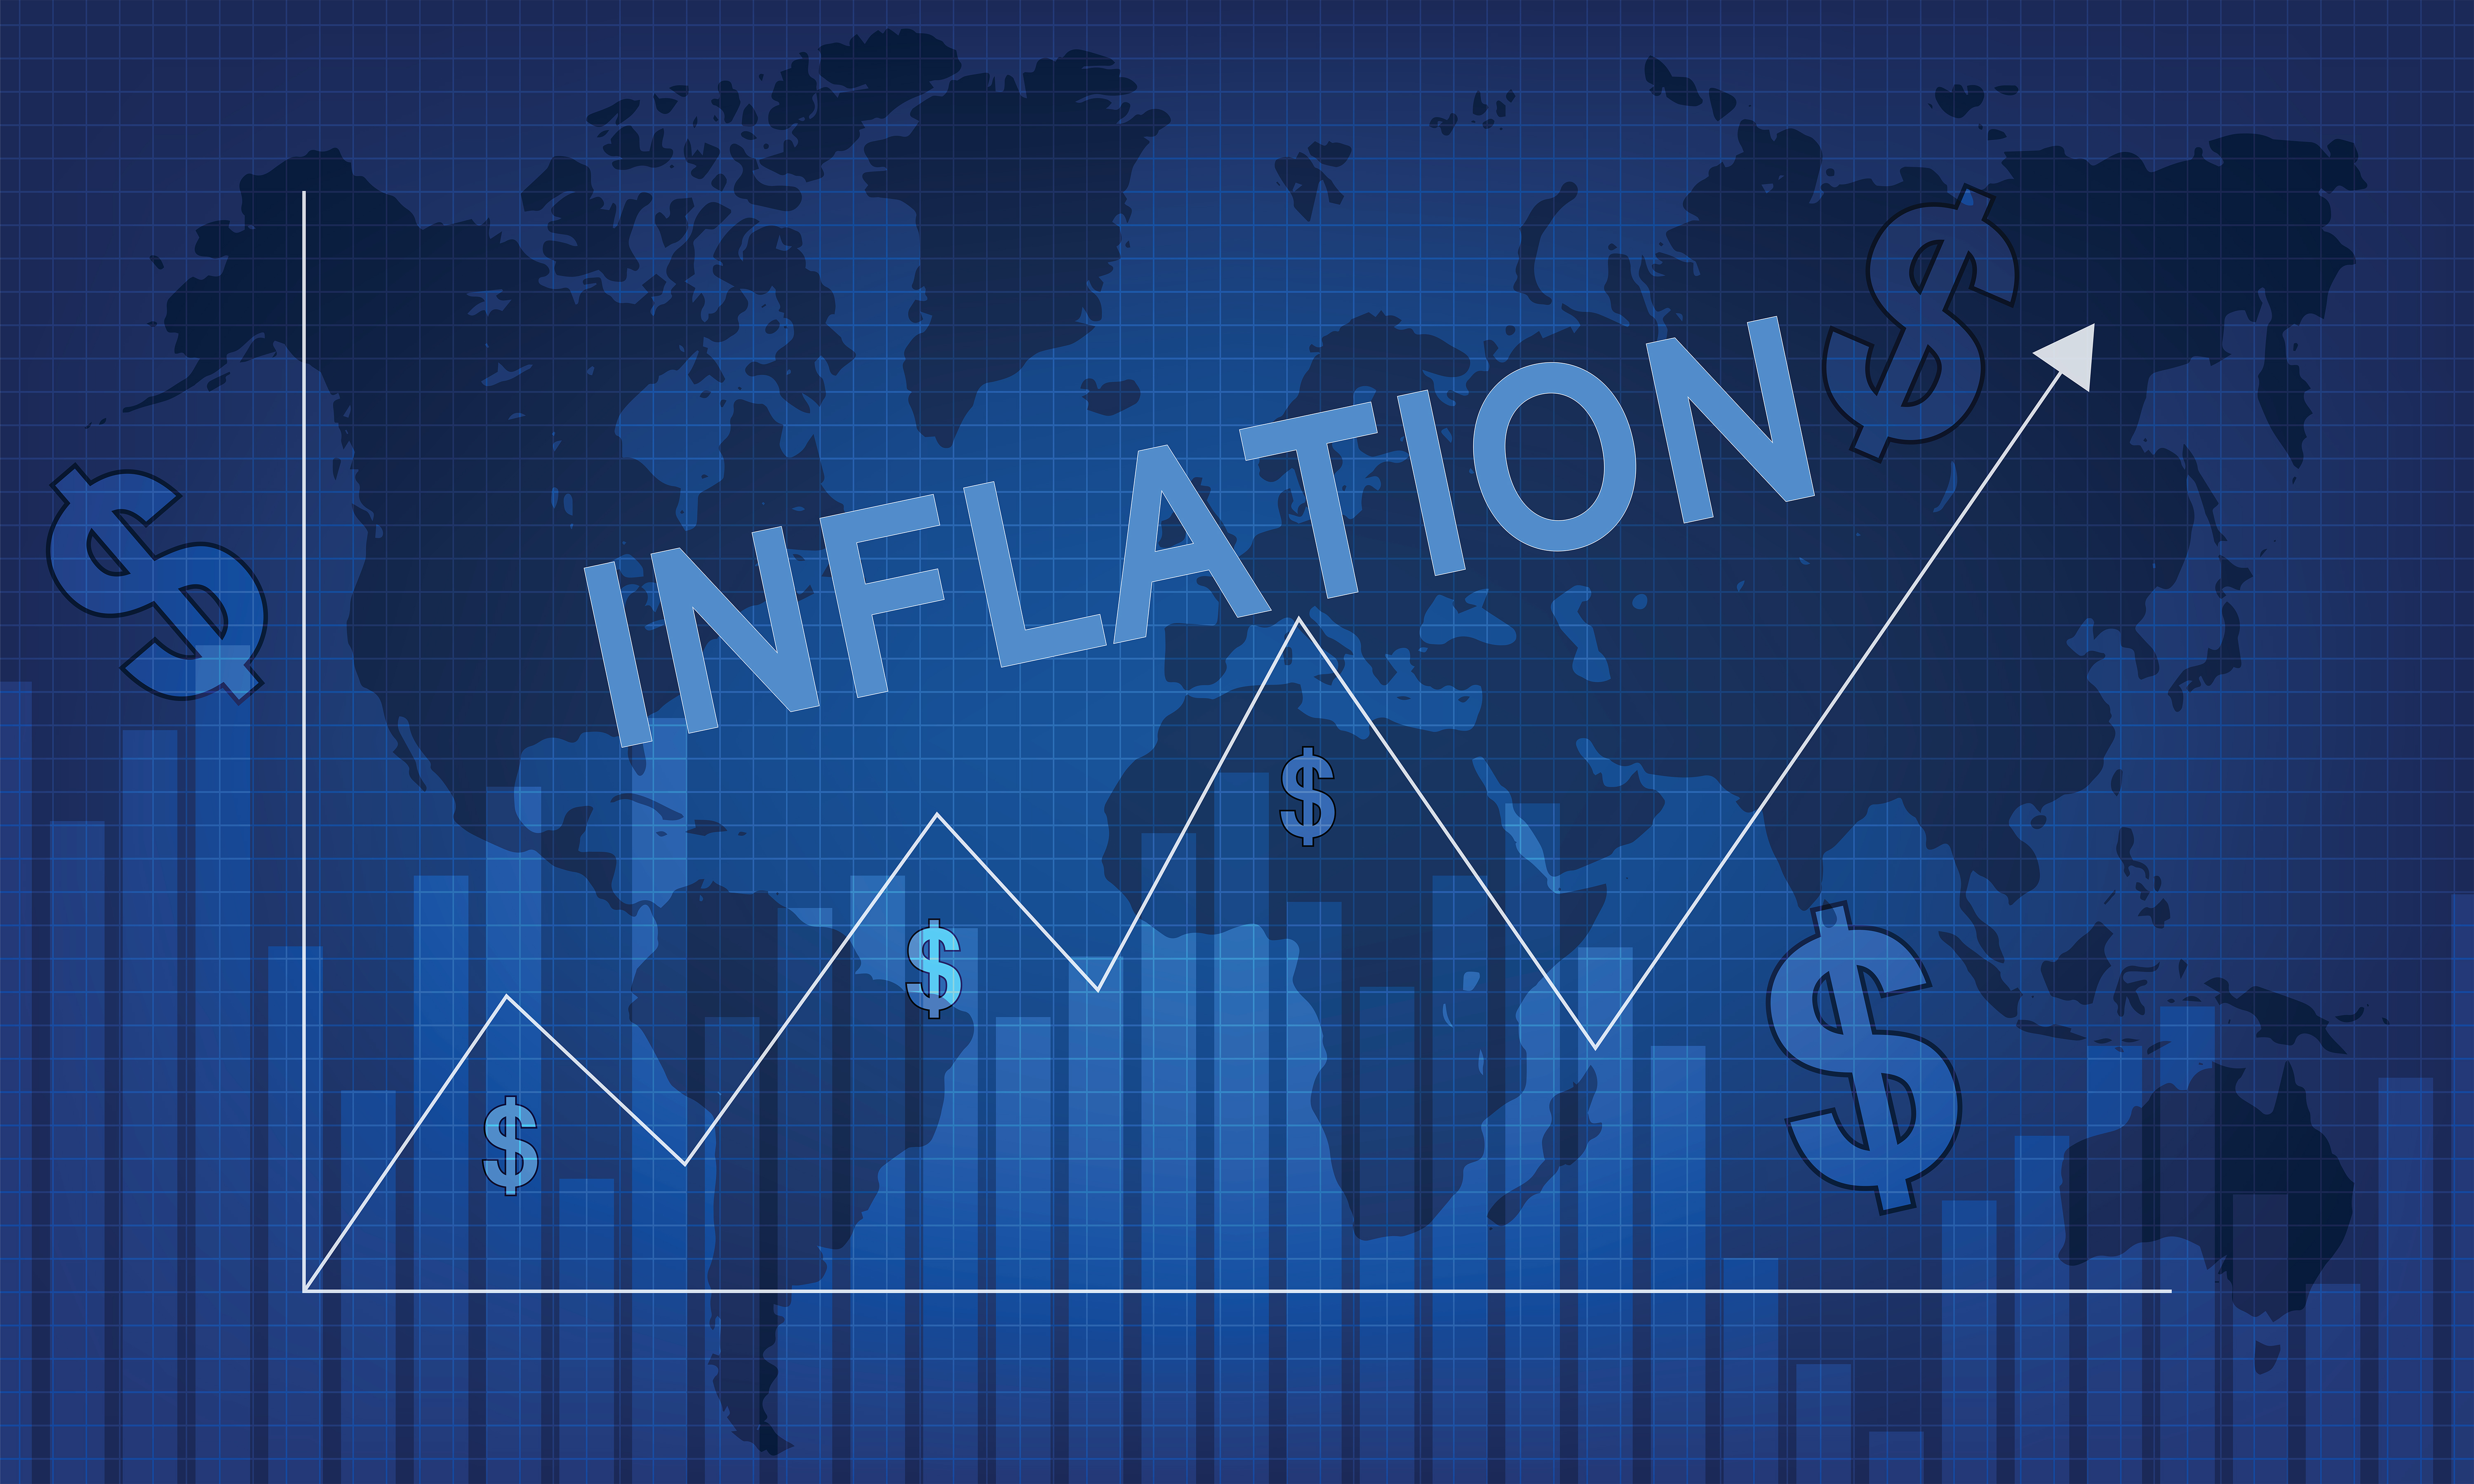 Inflation: Past, Present, and Future